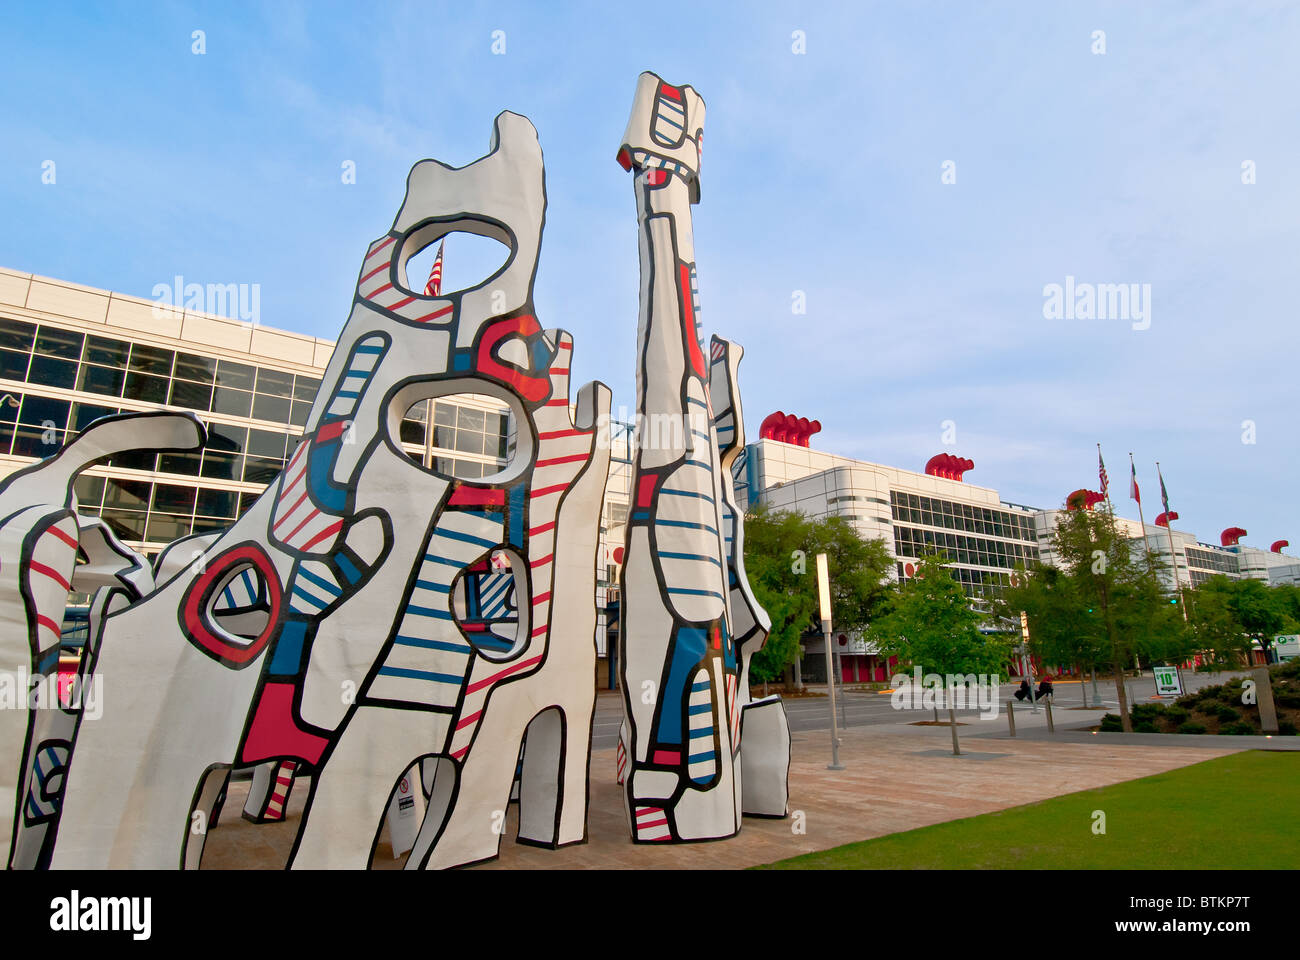 Monument Au Fantome" sculpture by Jean Dubuffet, Discovery Green across  from George R. Brown Convention Center, Houston, Texas Stock Photo - Alamy